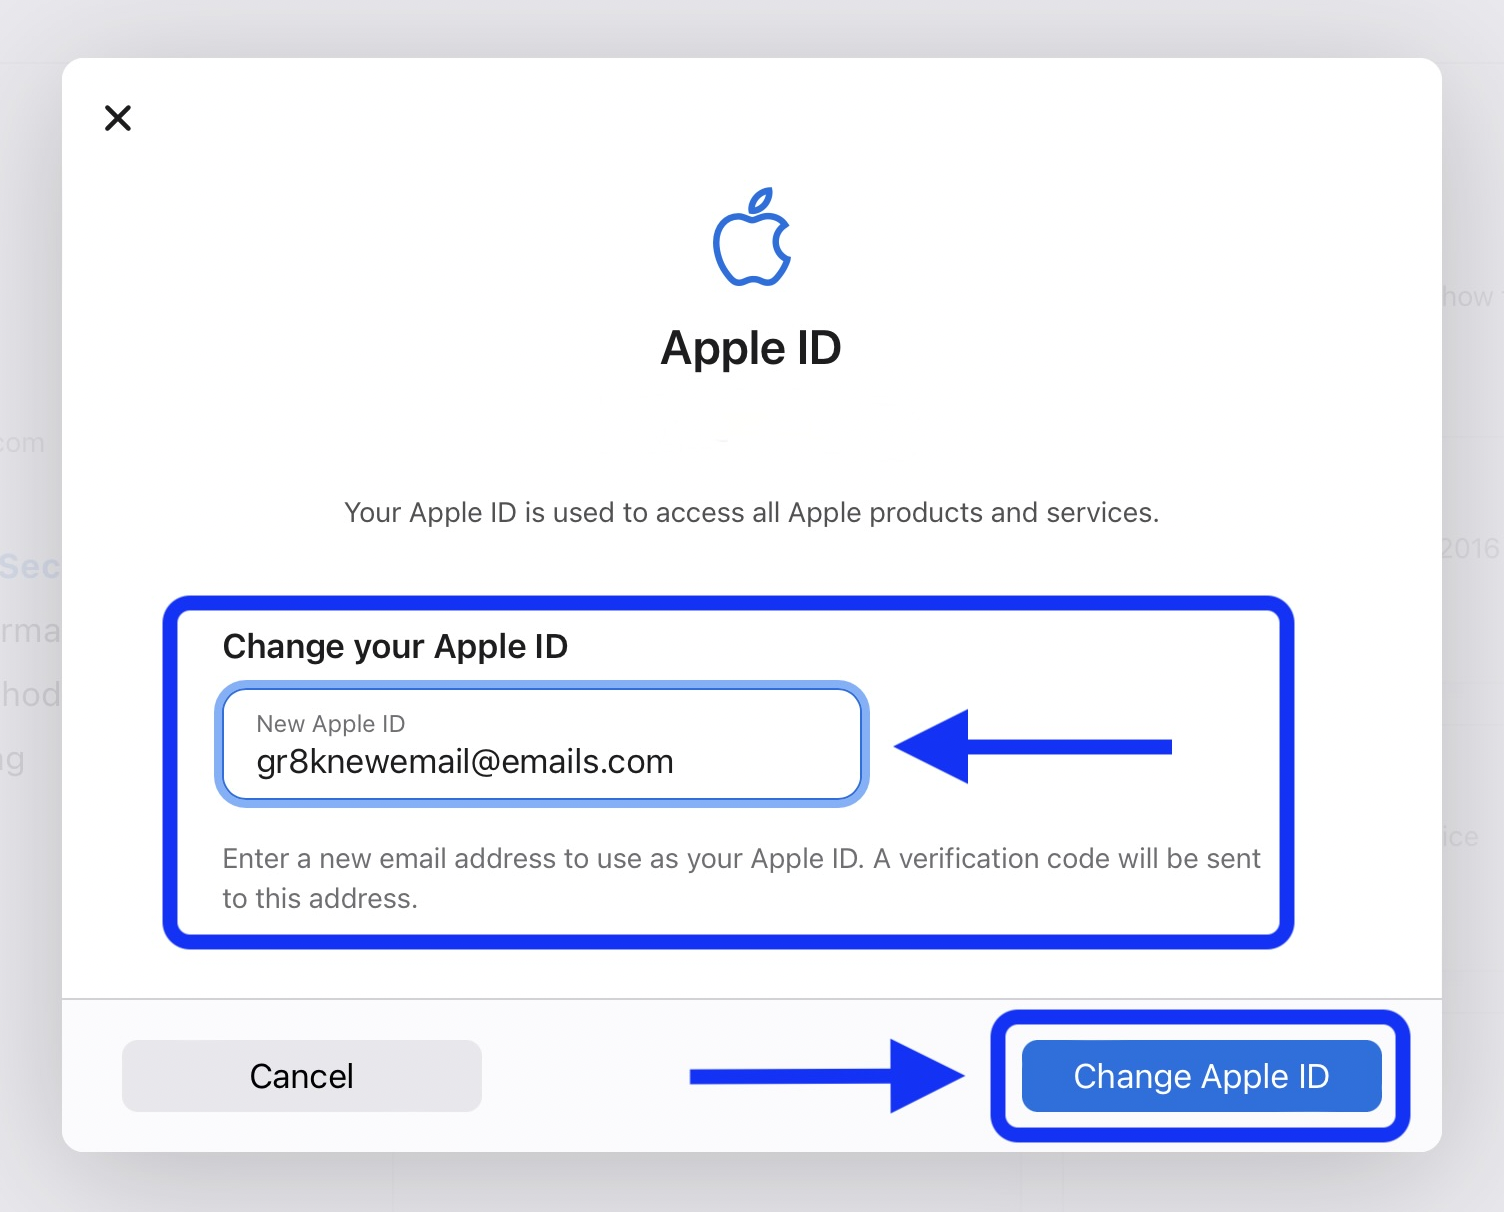 How do I completely change my Apple ID?